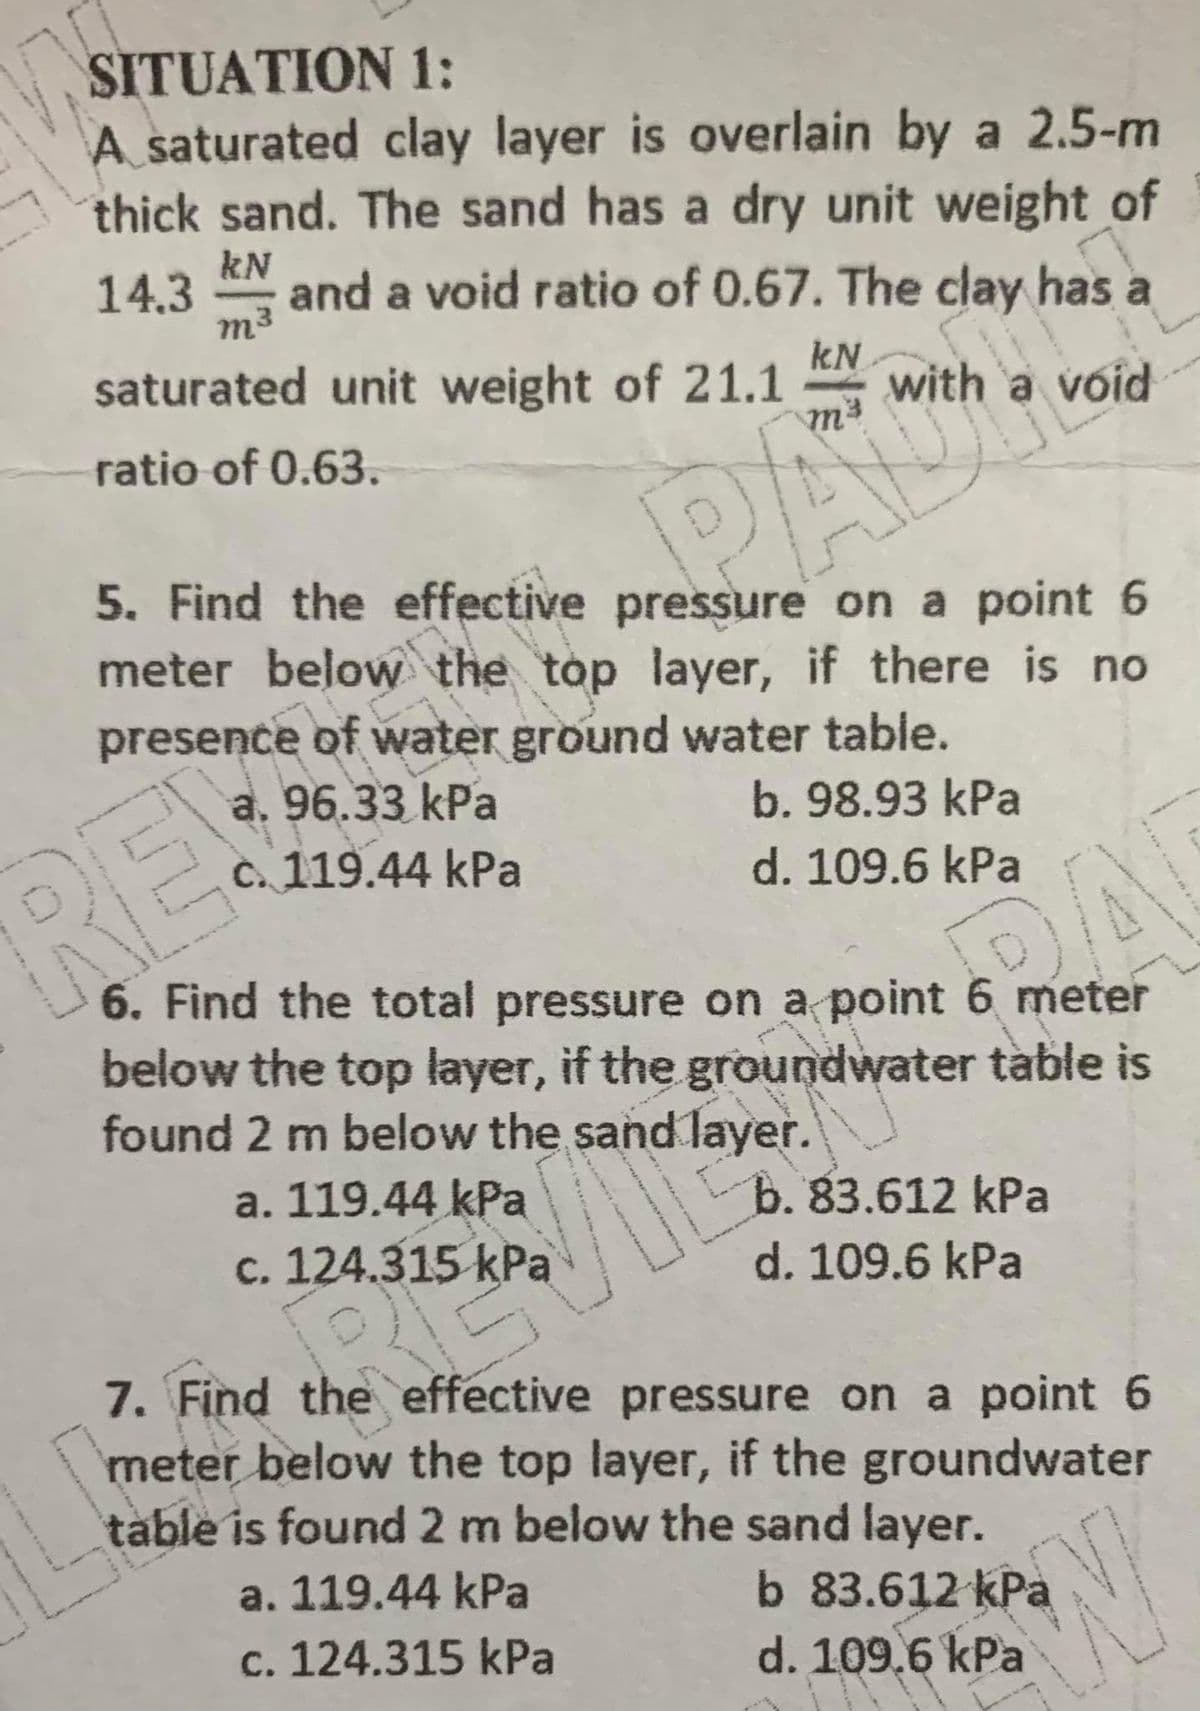 SITUATION 1:
A saturated clay layer is overlain by a 2.5-m
thick sand. The sand has a dry unit weight of
kN
14.3
m3
and a void ratio of 0.67. The clay has a
saturated unit weight of 21.1
kN
with a void
ratio of 0.63.
PACIS
5. Find the effective pressure on a point 6
meter below the top layer, if there is no
presence of water ground water table.
a. 96.33 kPa
C. 119.44 kPa
b. 98.93 kPa
RE!
d. 109.6 kPa
6. Find the total pressure on a point 6 meter
below the top layer, if the groundwater table is
found 2 m below the sand layer.
a. 119.44 kPa
с. 124.315 kPа
b. 83.612 kPa
d. 109.6 kPa
7. Find the effective pressure on a point 6
meter below the top layer, if the groundwater
table is found 2 m below the sand layer.
a. 119.44 kPa
b 83.612 kPa
d. 109.6 kPa
c. 124.315 kPa
